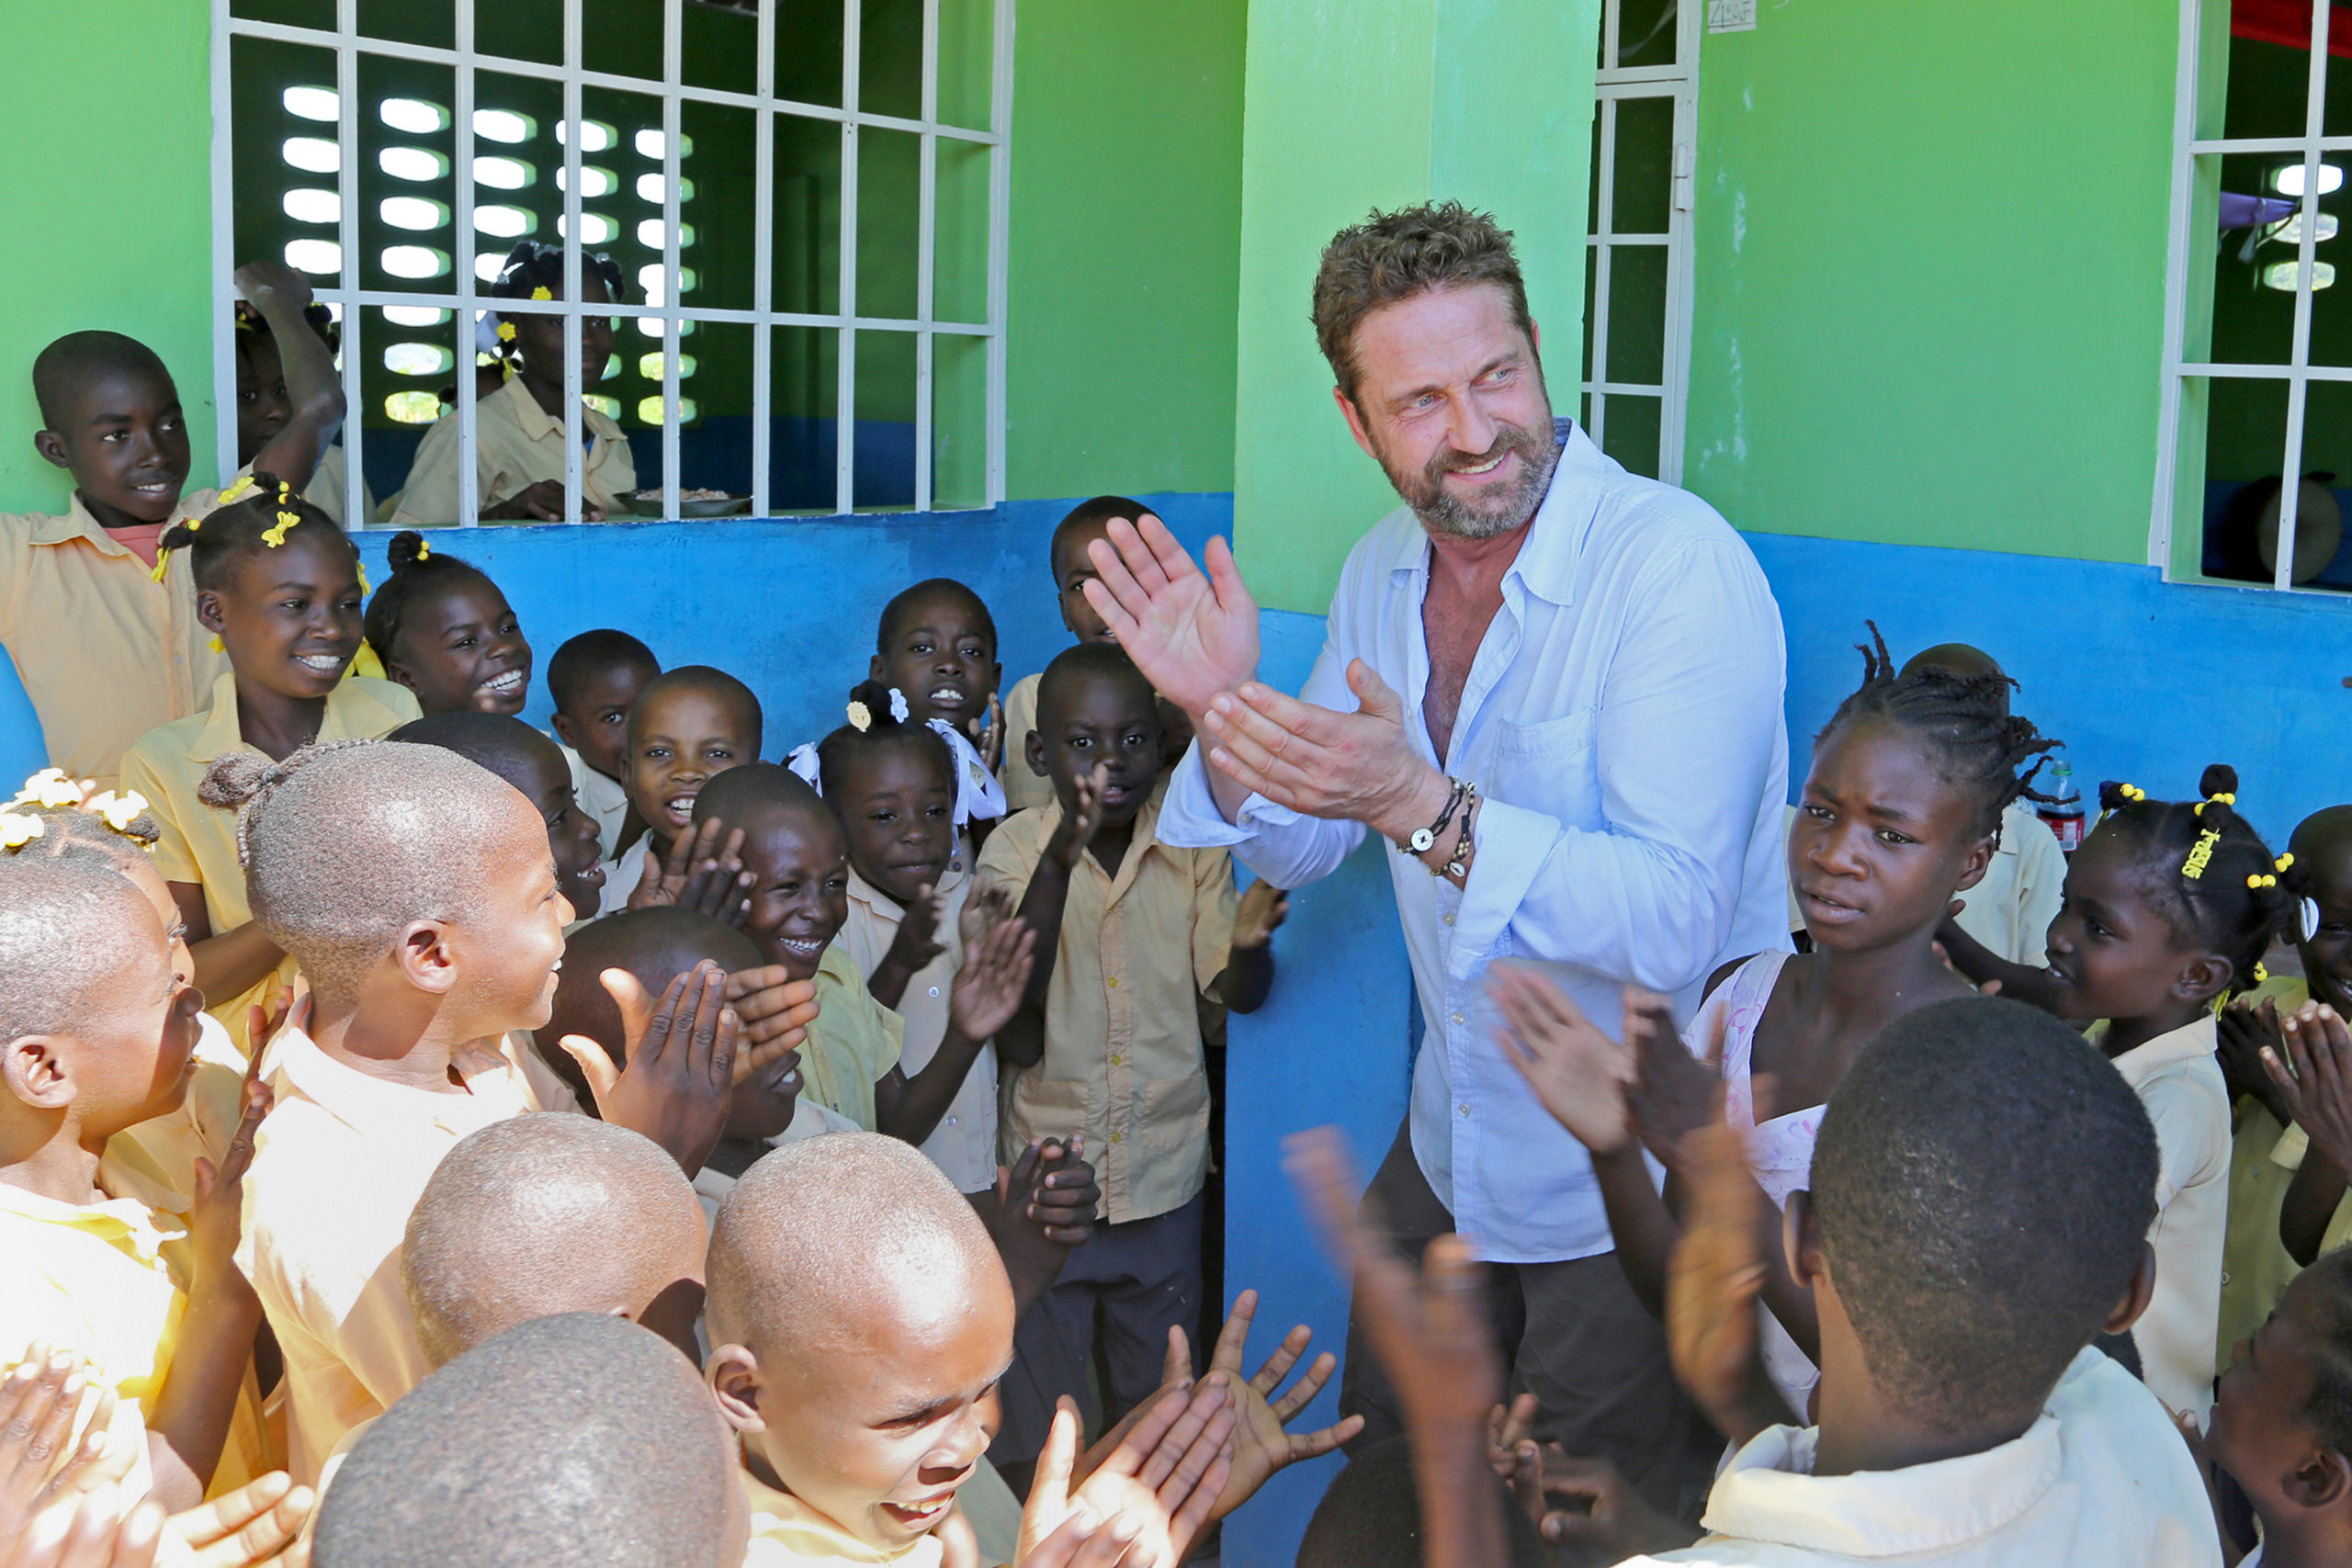 Gerard Butler in Haiti helping the school feeding charity Mary's Meals